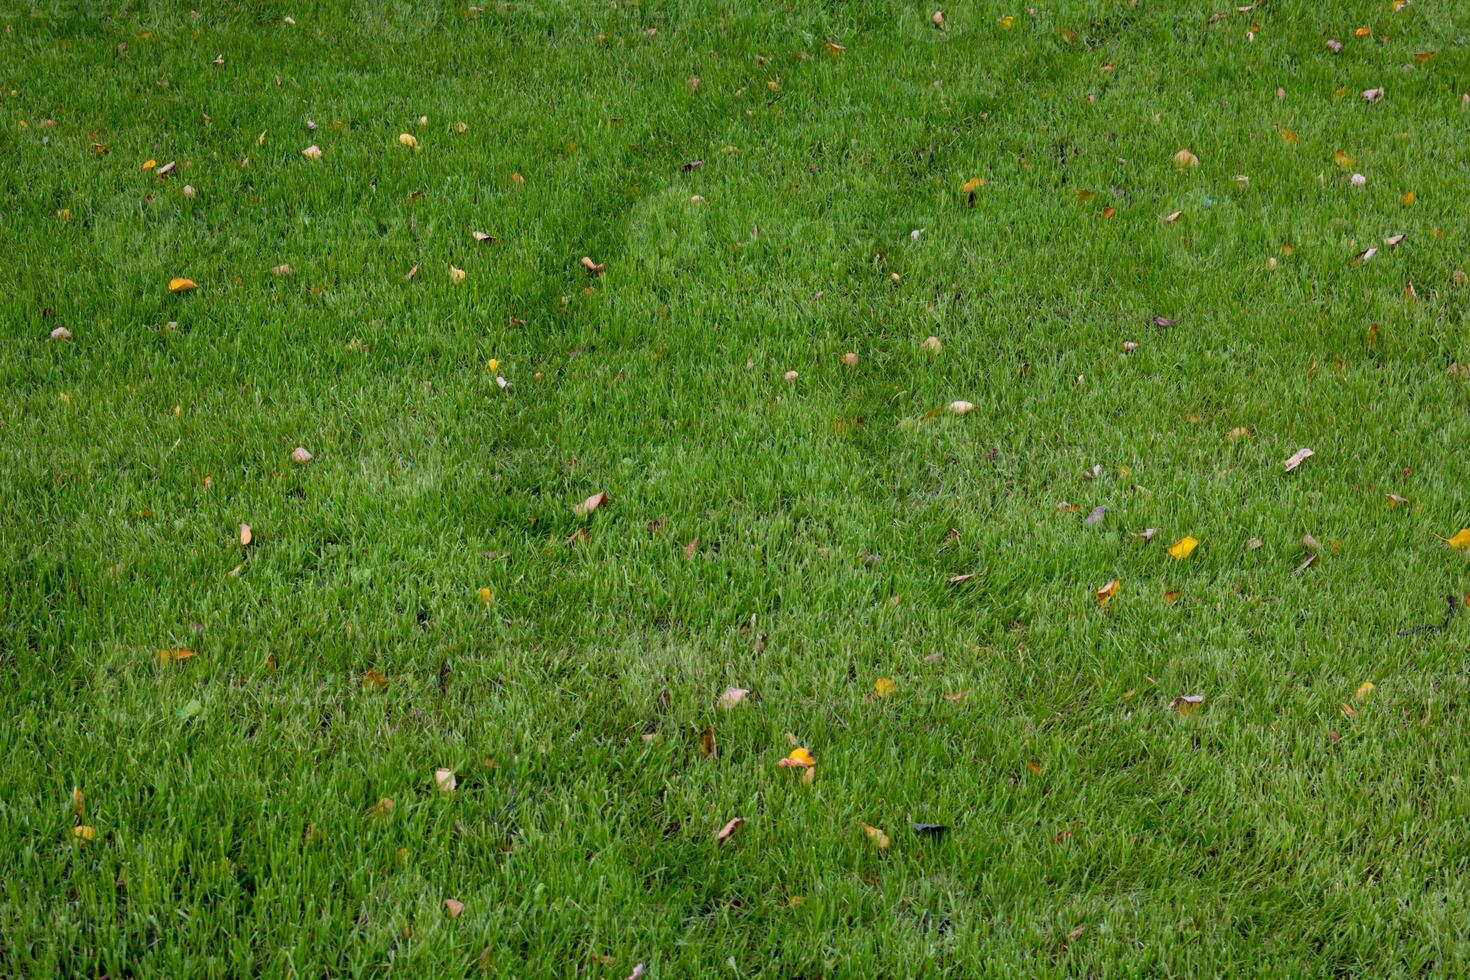 Traces of car wheels on the green grass. Outdoor sunny view of a fresh green lawn with a trace from the wheel of a vehicle. photo